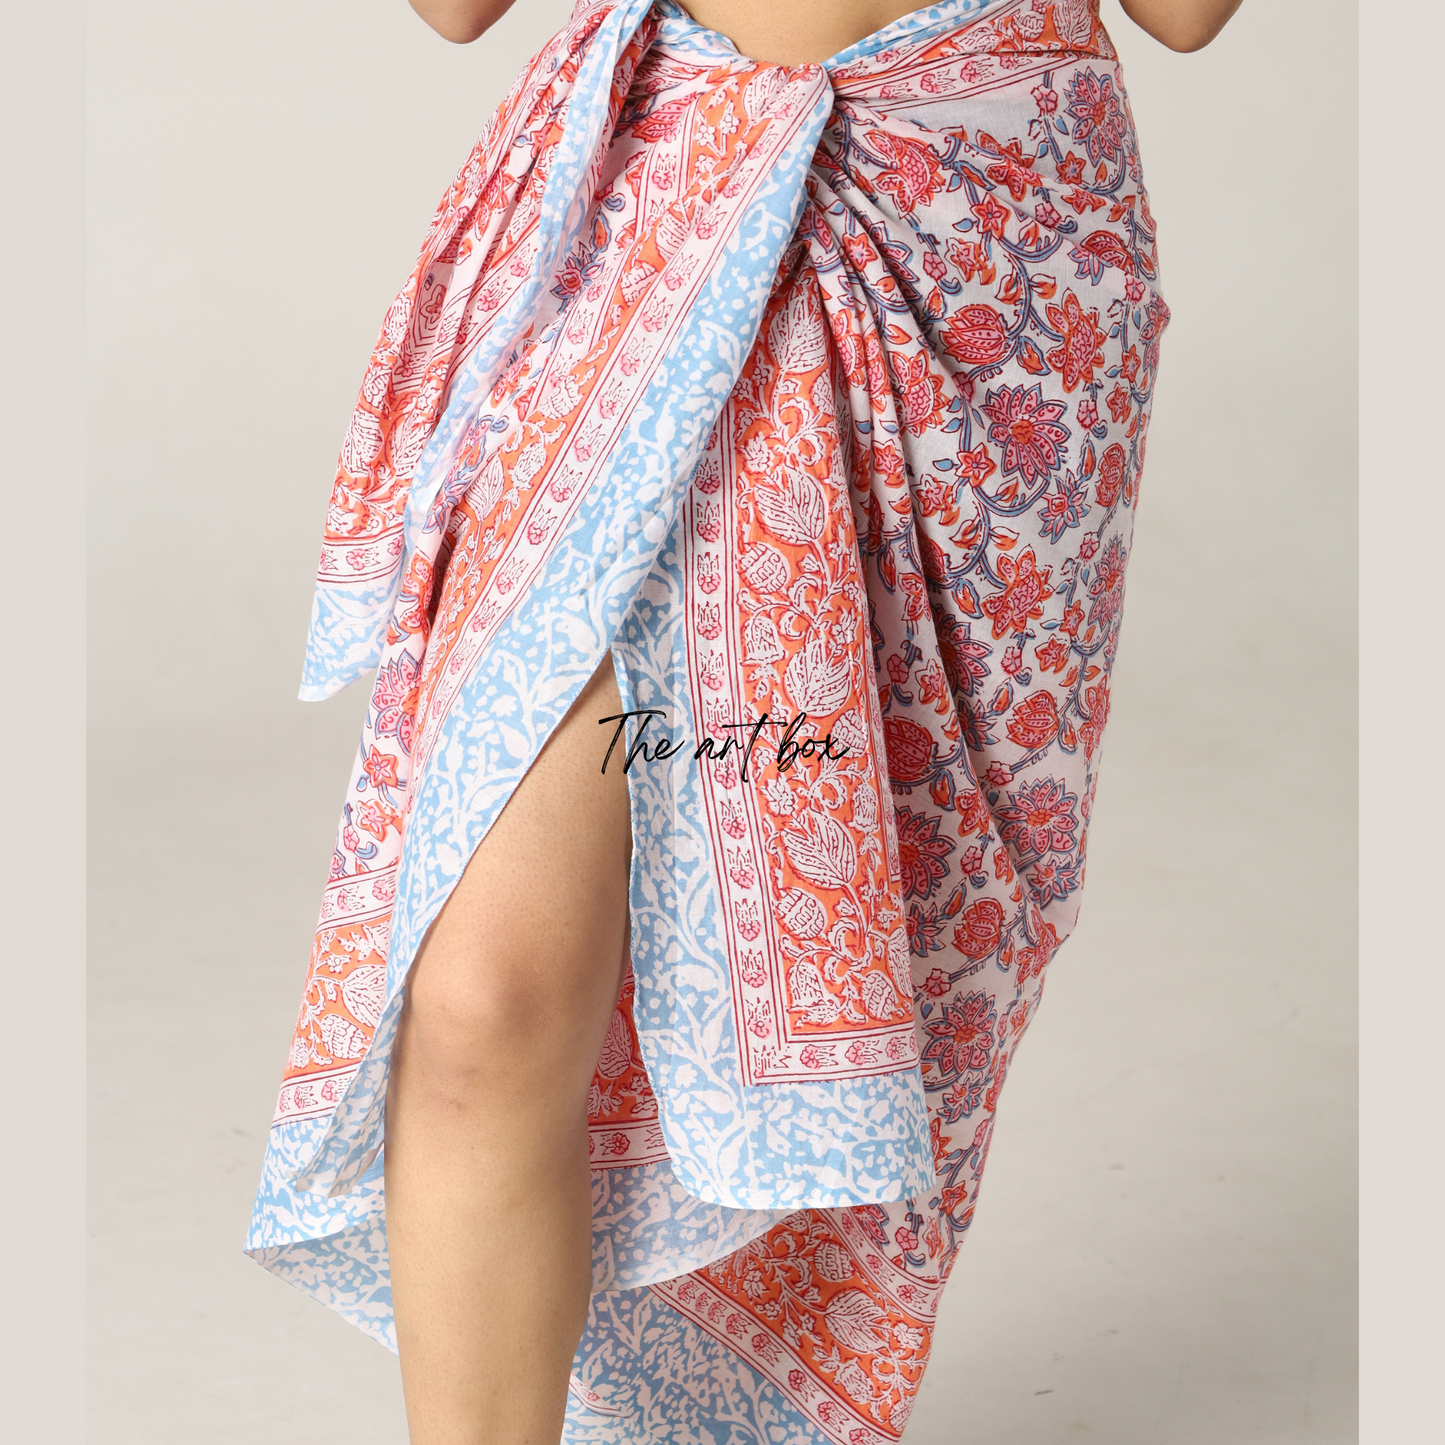 Beach Essentials: Sarong Pareo for Sun-Kissed Style